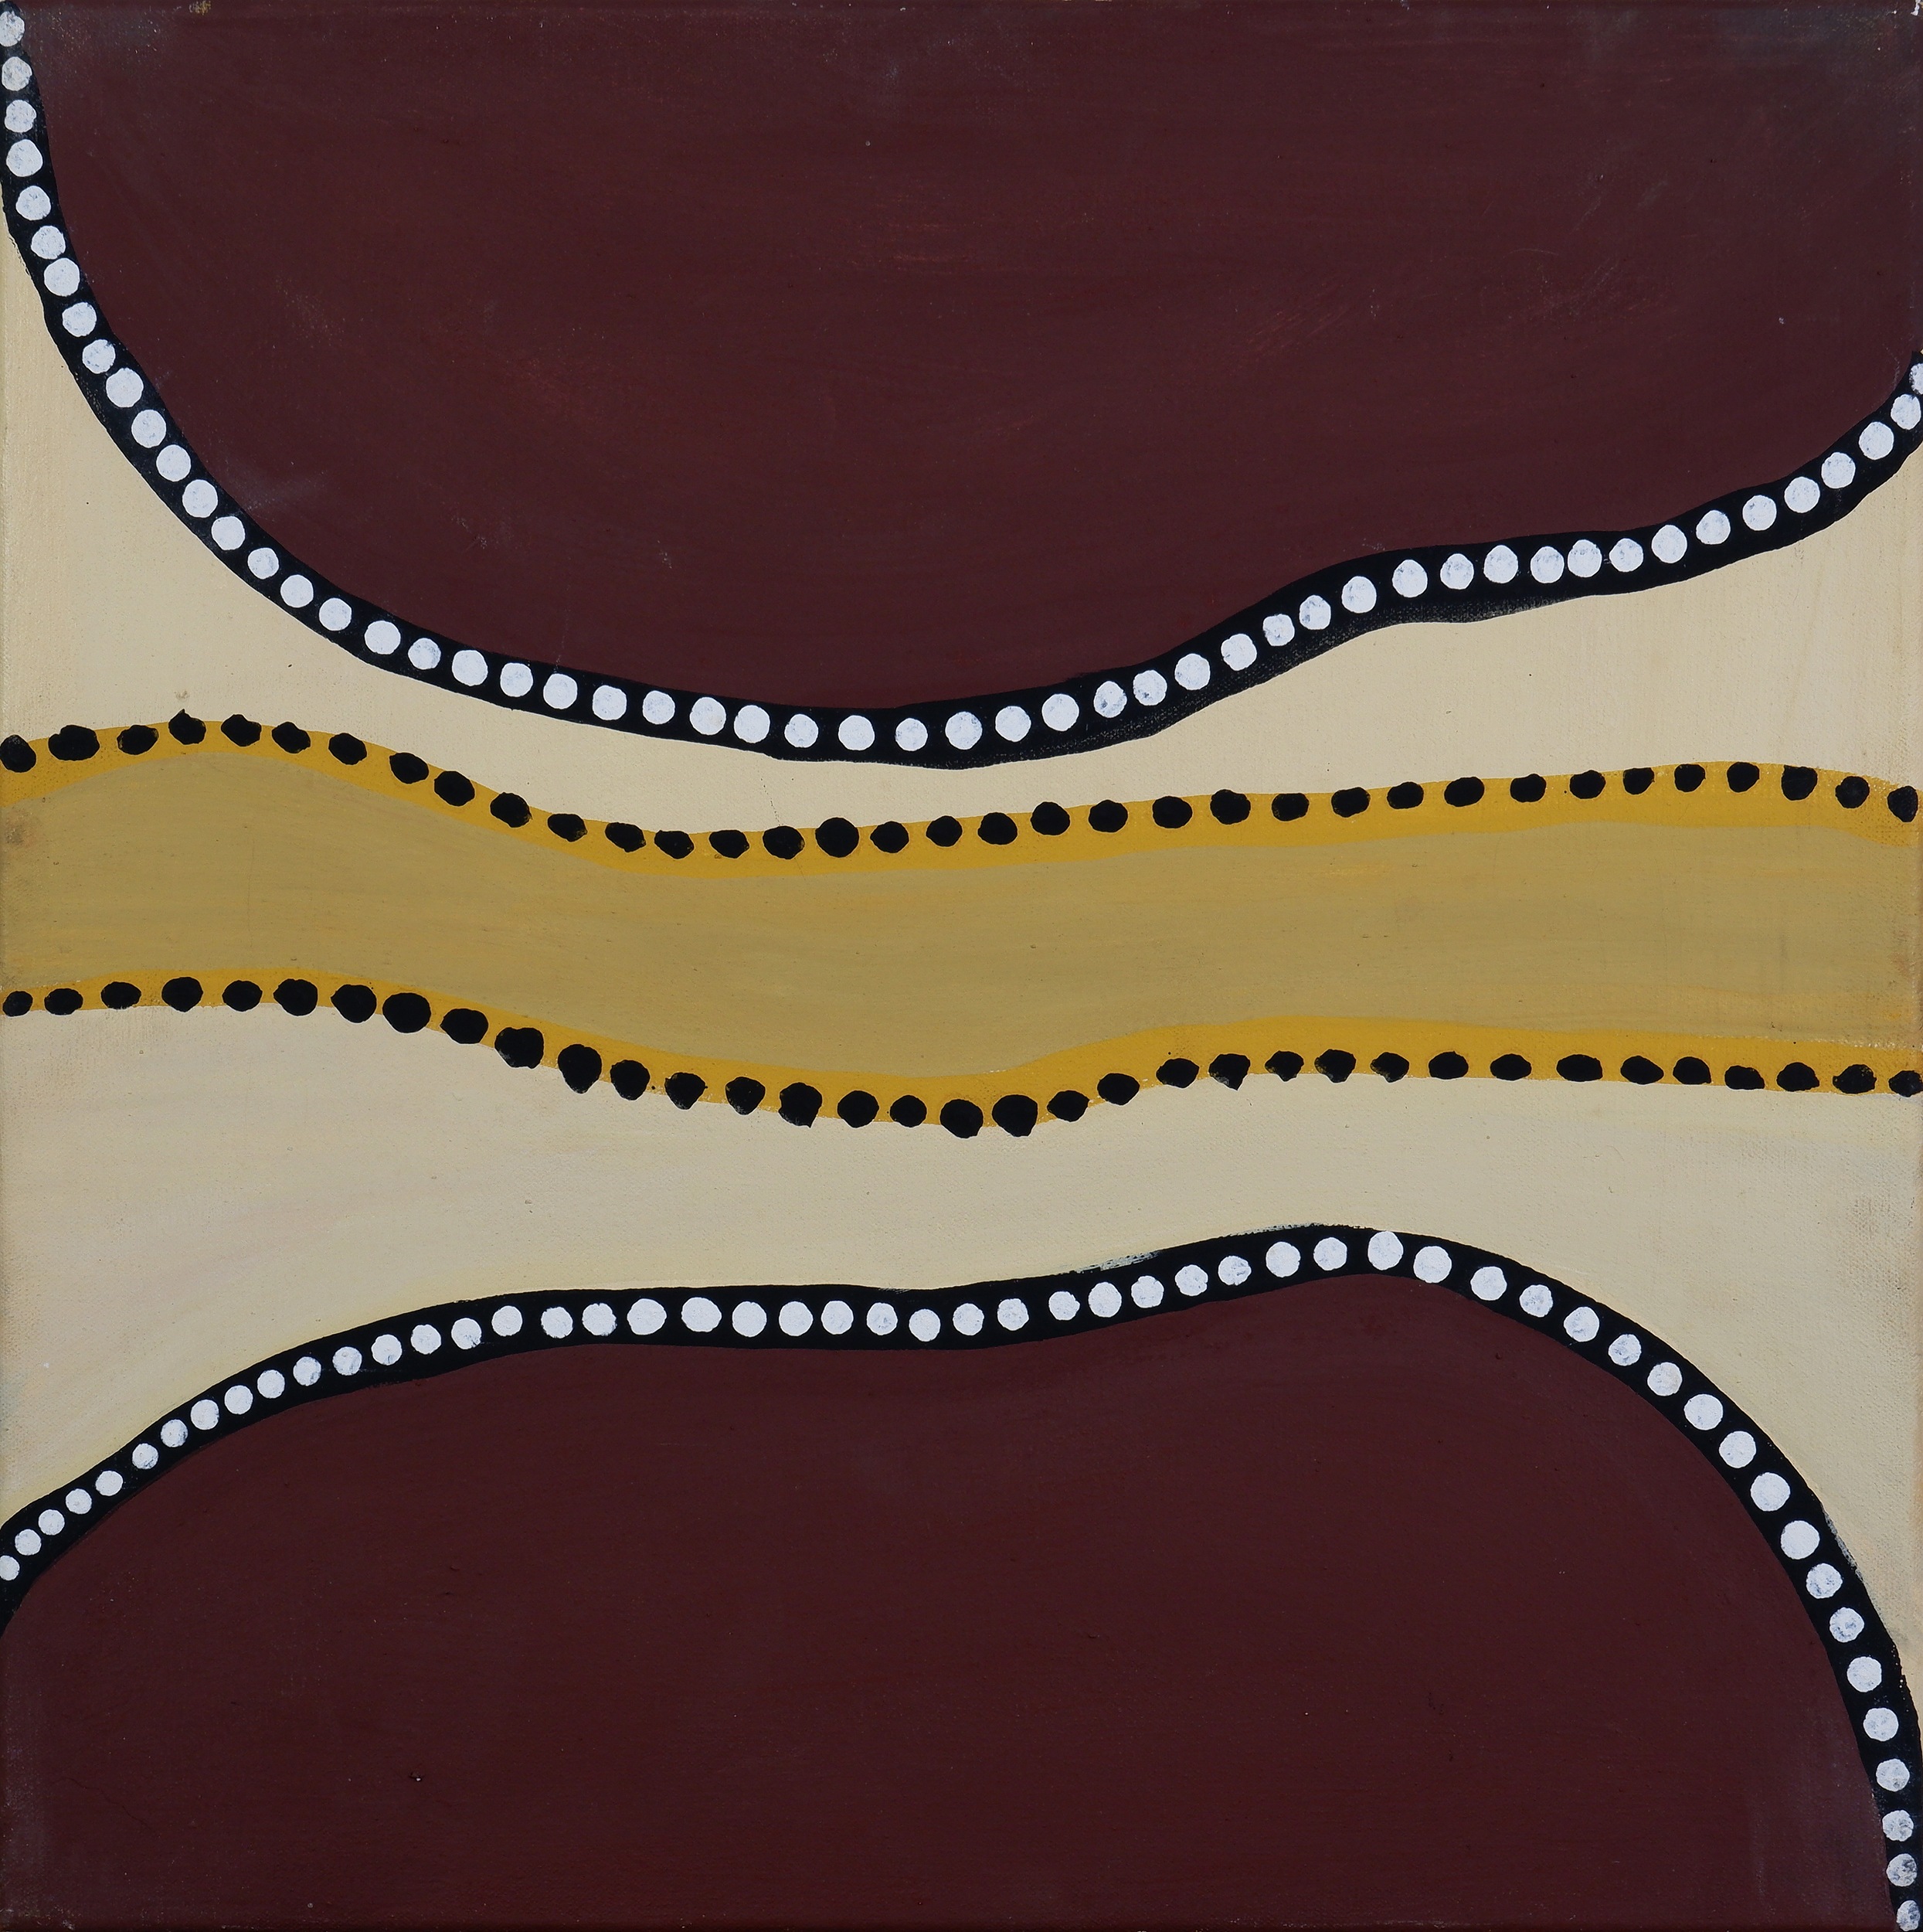 'Yvonne Newry (born 1973, Miriwoong language group), Argument Gap, Natural Ochres and Pigments on Canvas, 45 x 45 cm'